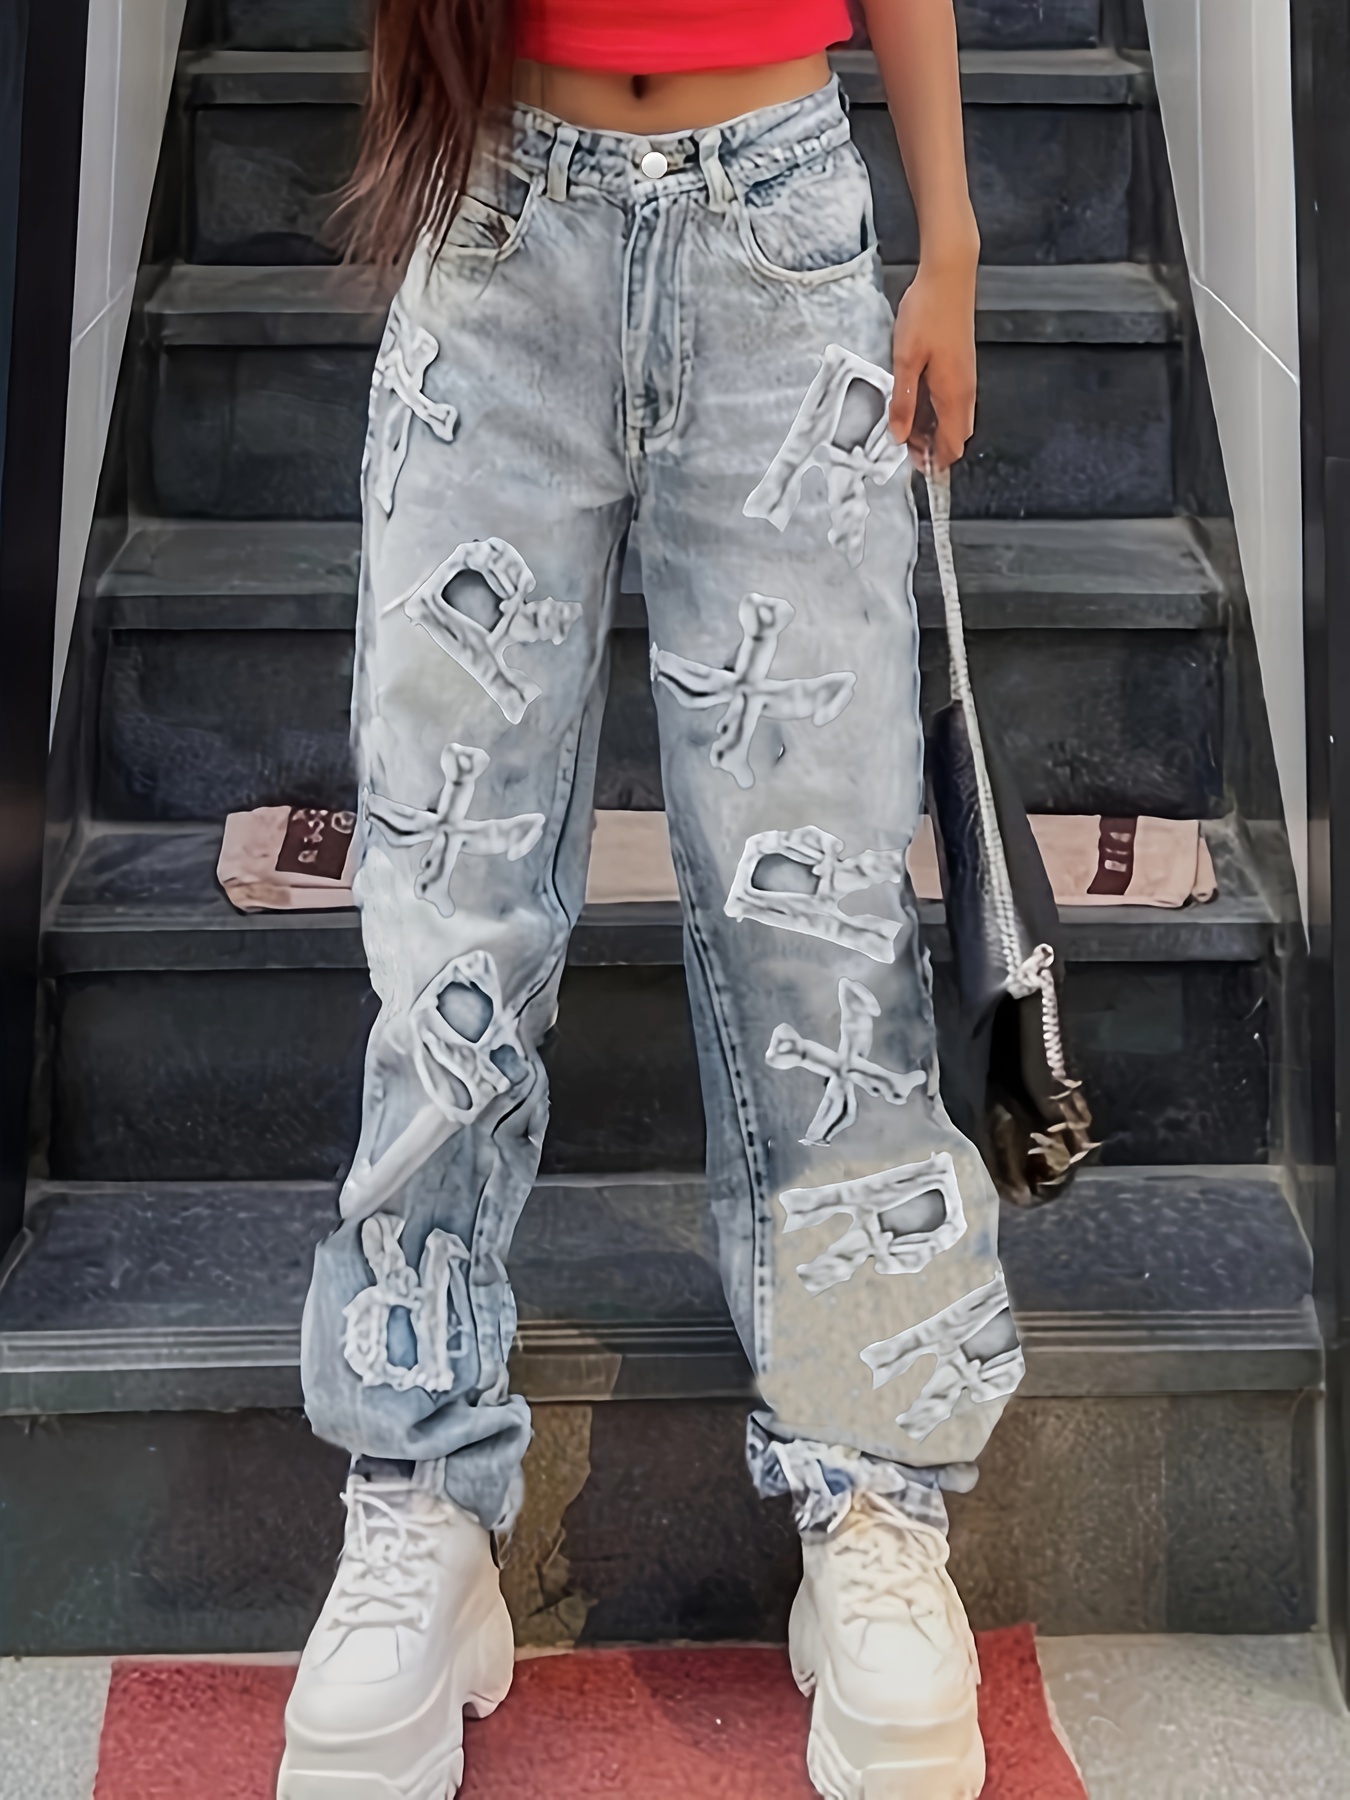 High * Straight Legs Loose Baggy Jeans, Ripped Knees Cut Out Front Wide  Legs Distressed Light Blue Boyfriend Pants, Women's Denim & Clothing